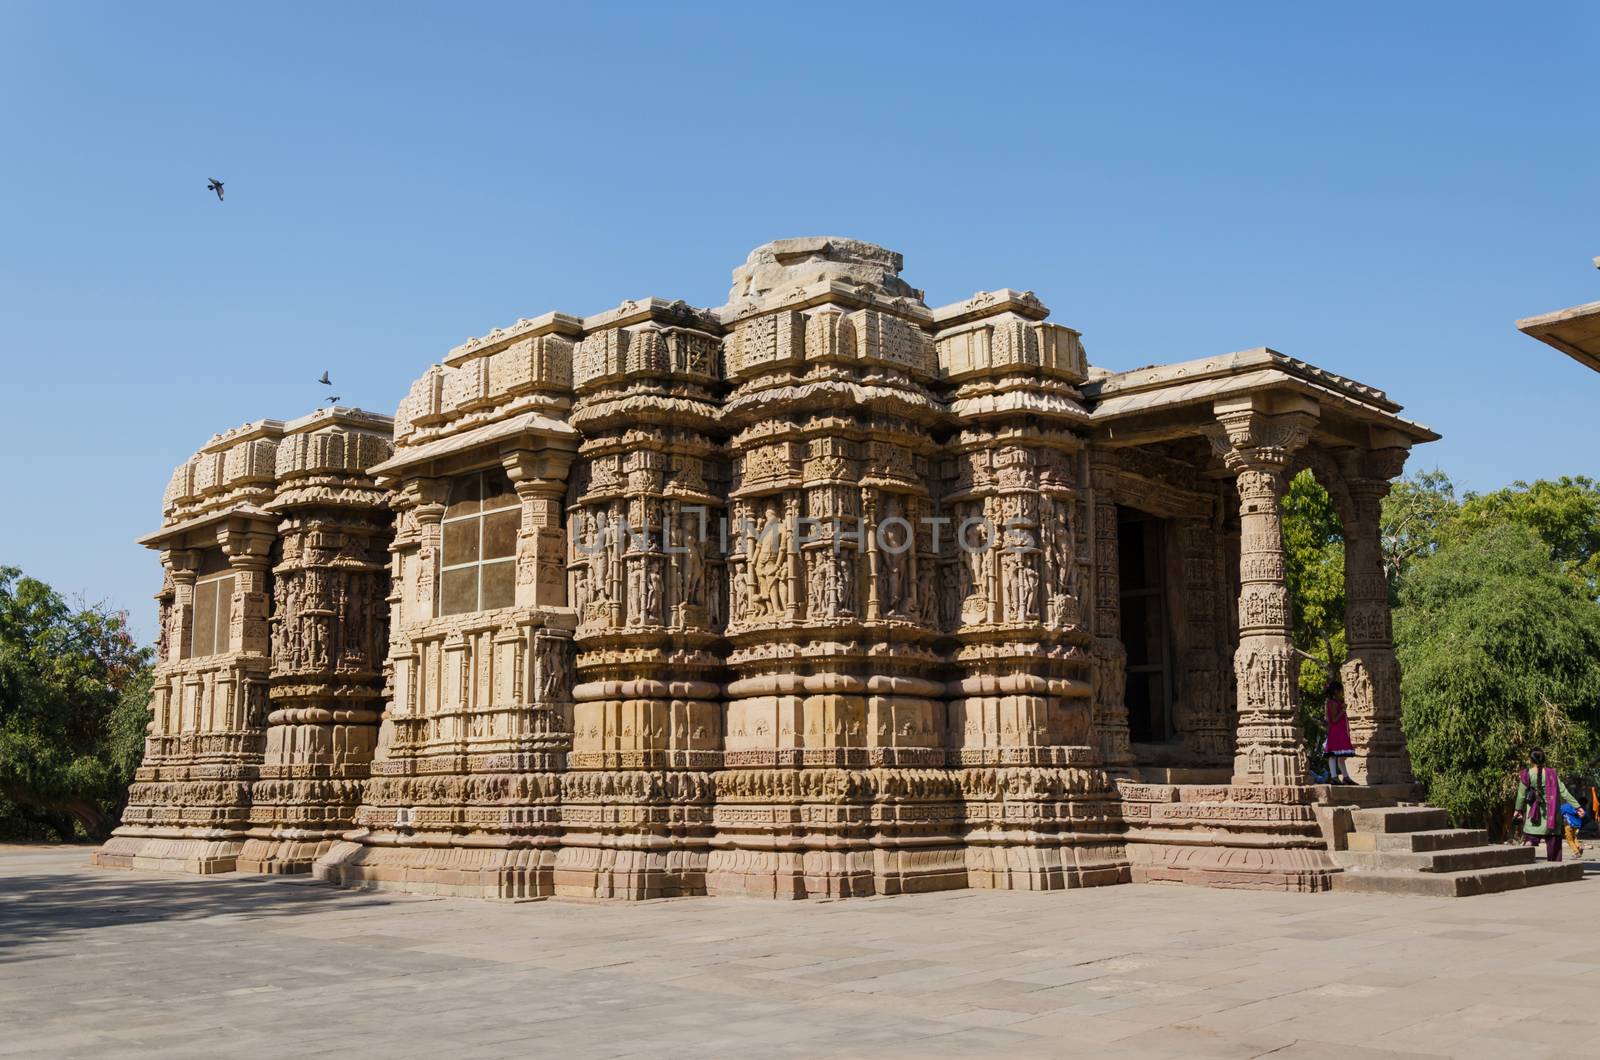 Ahmedabad, India - December 25, 2014: Tourist visit Sun Temple M by siraanamwong